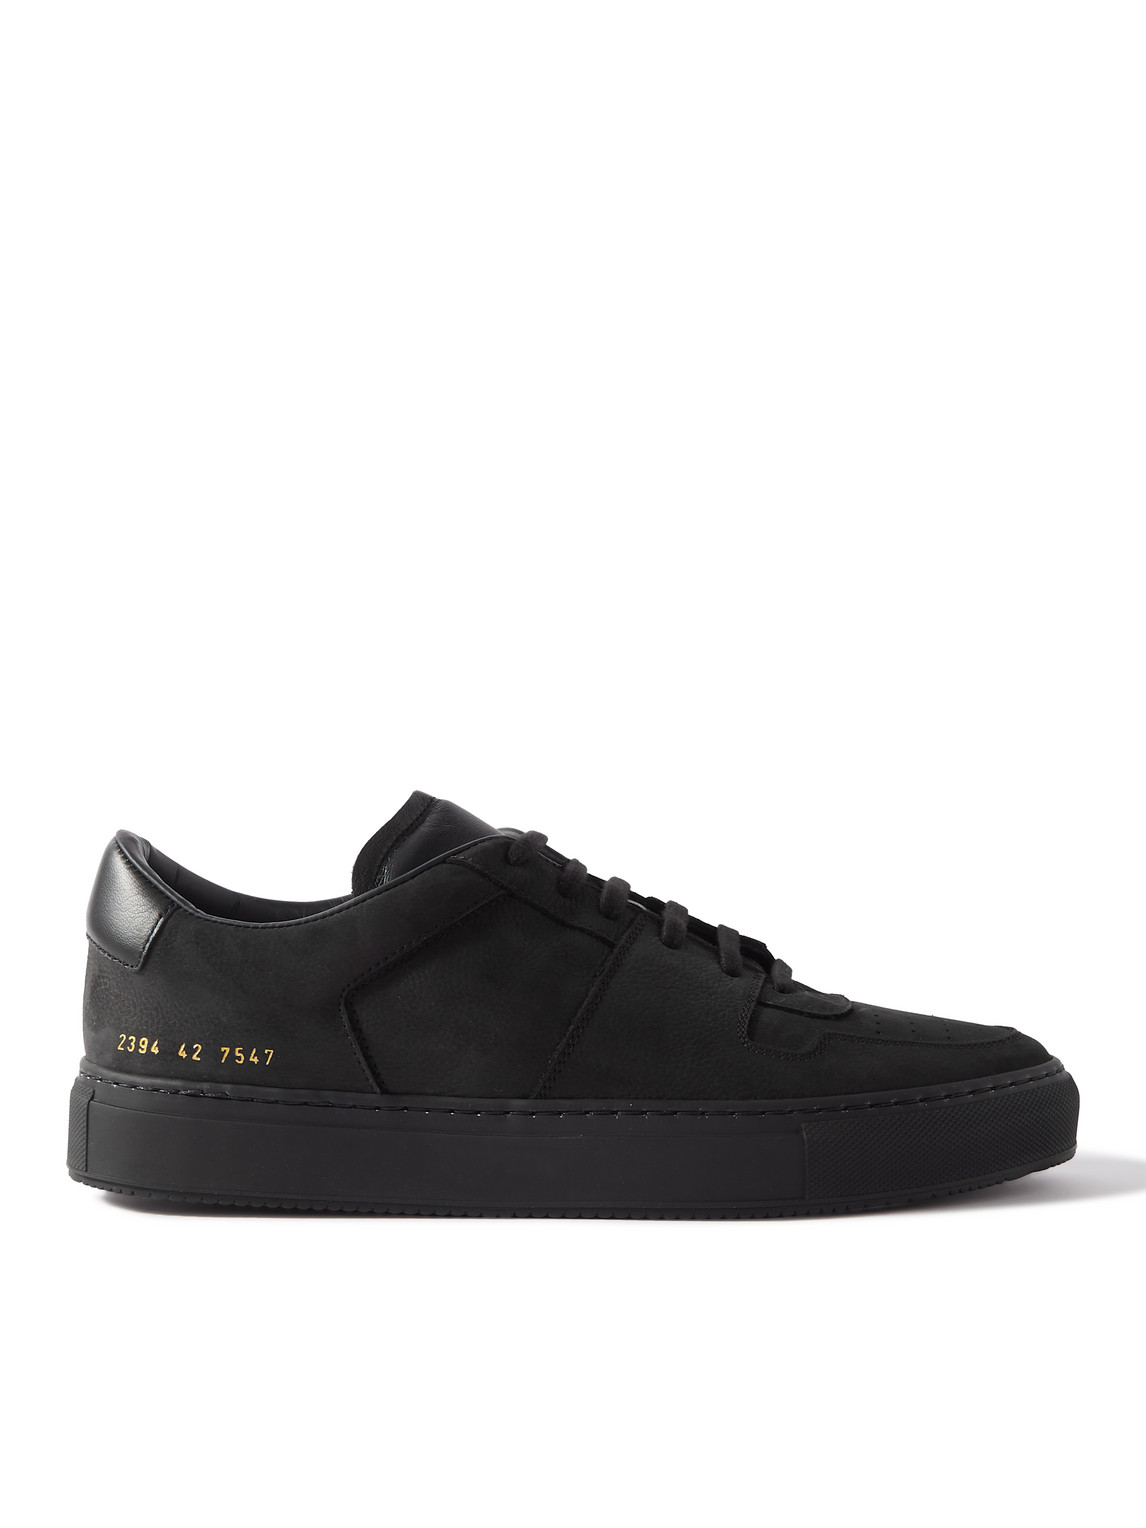 COMMON PROJECTS DECADES LEATHER SNEAKERS